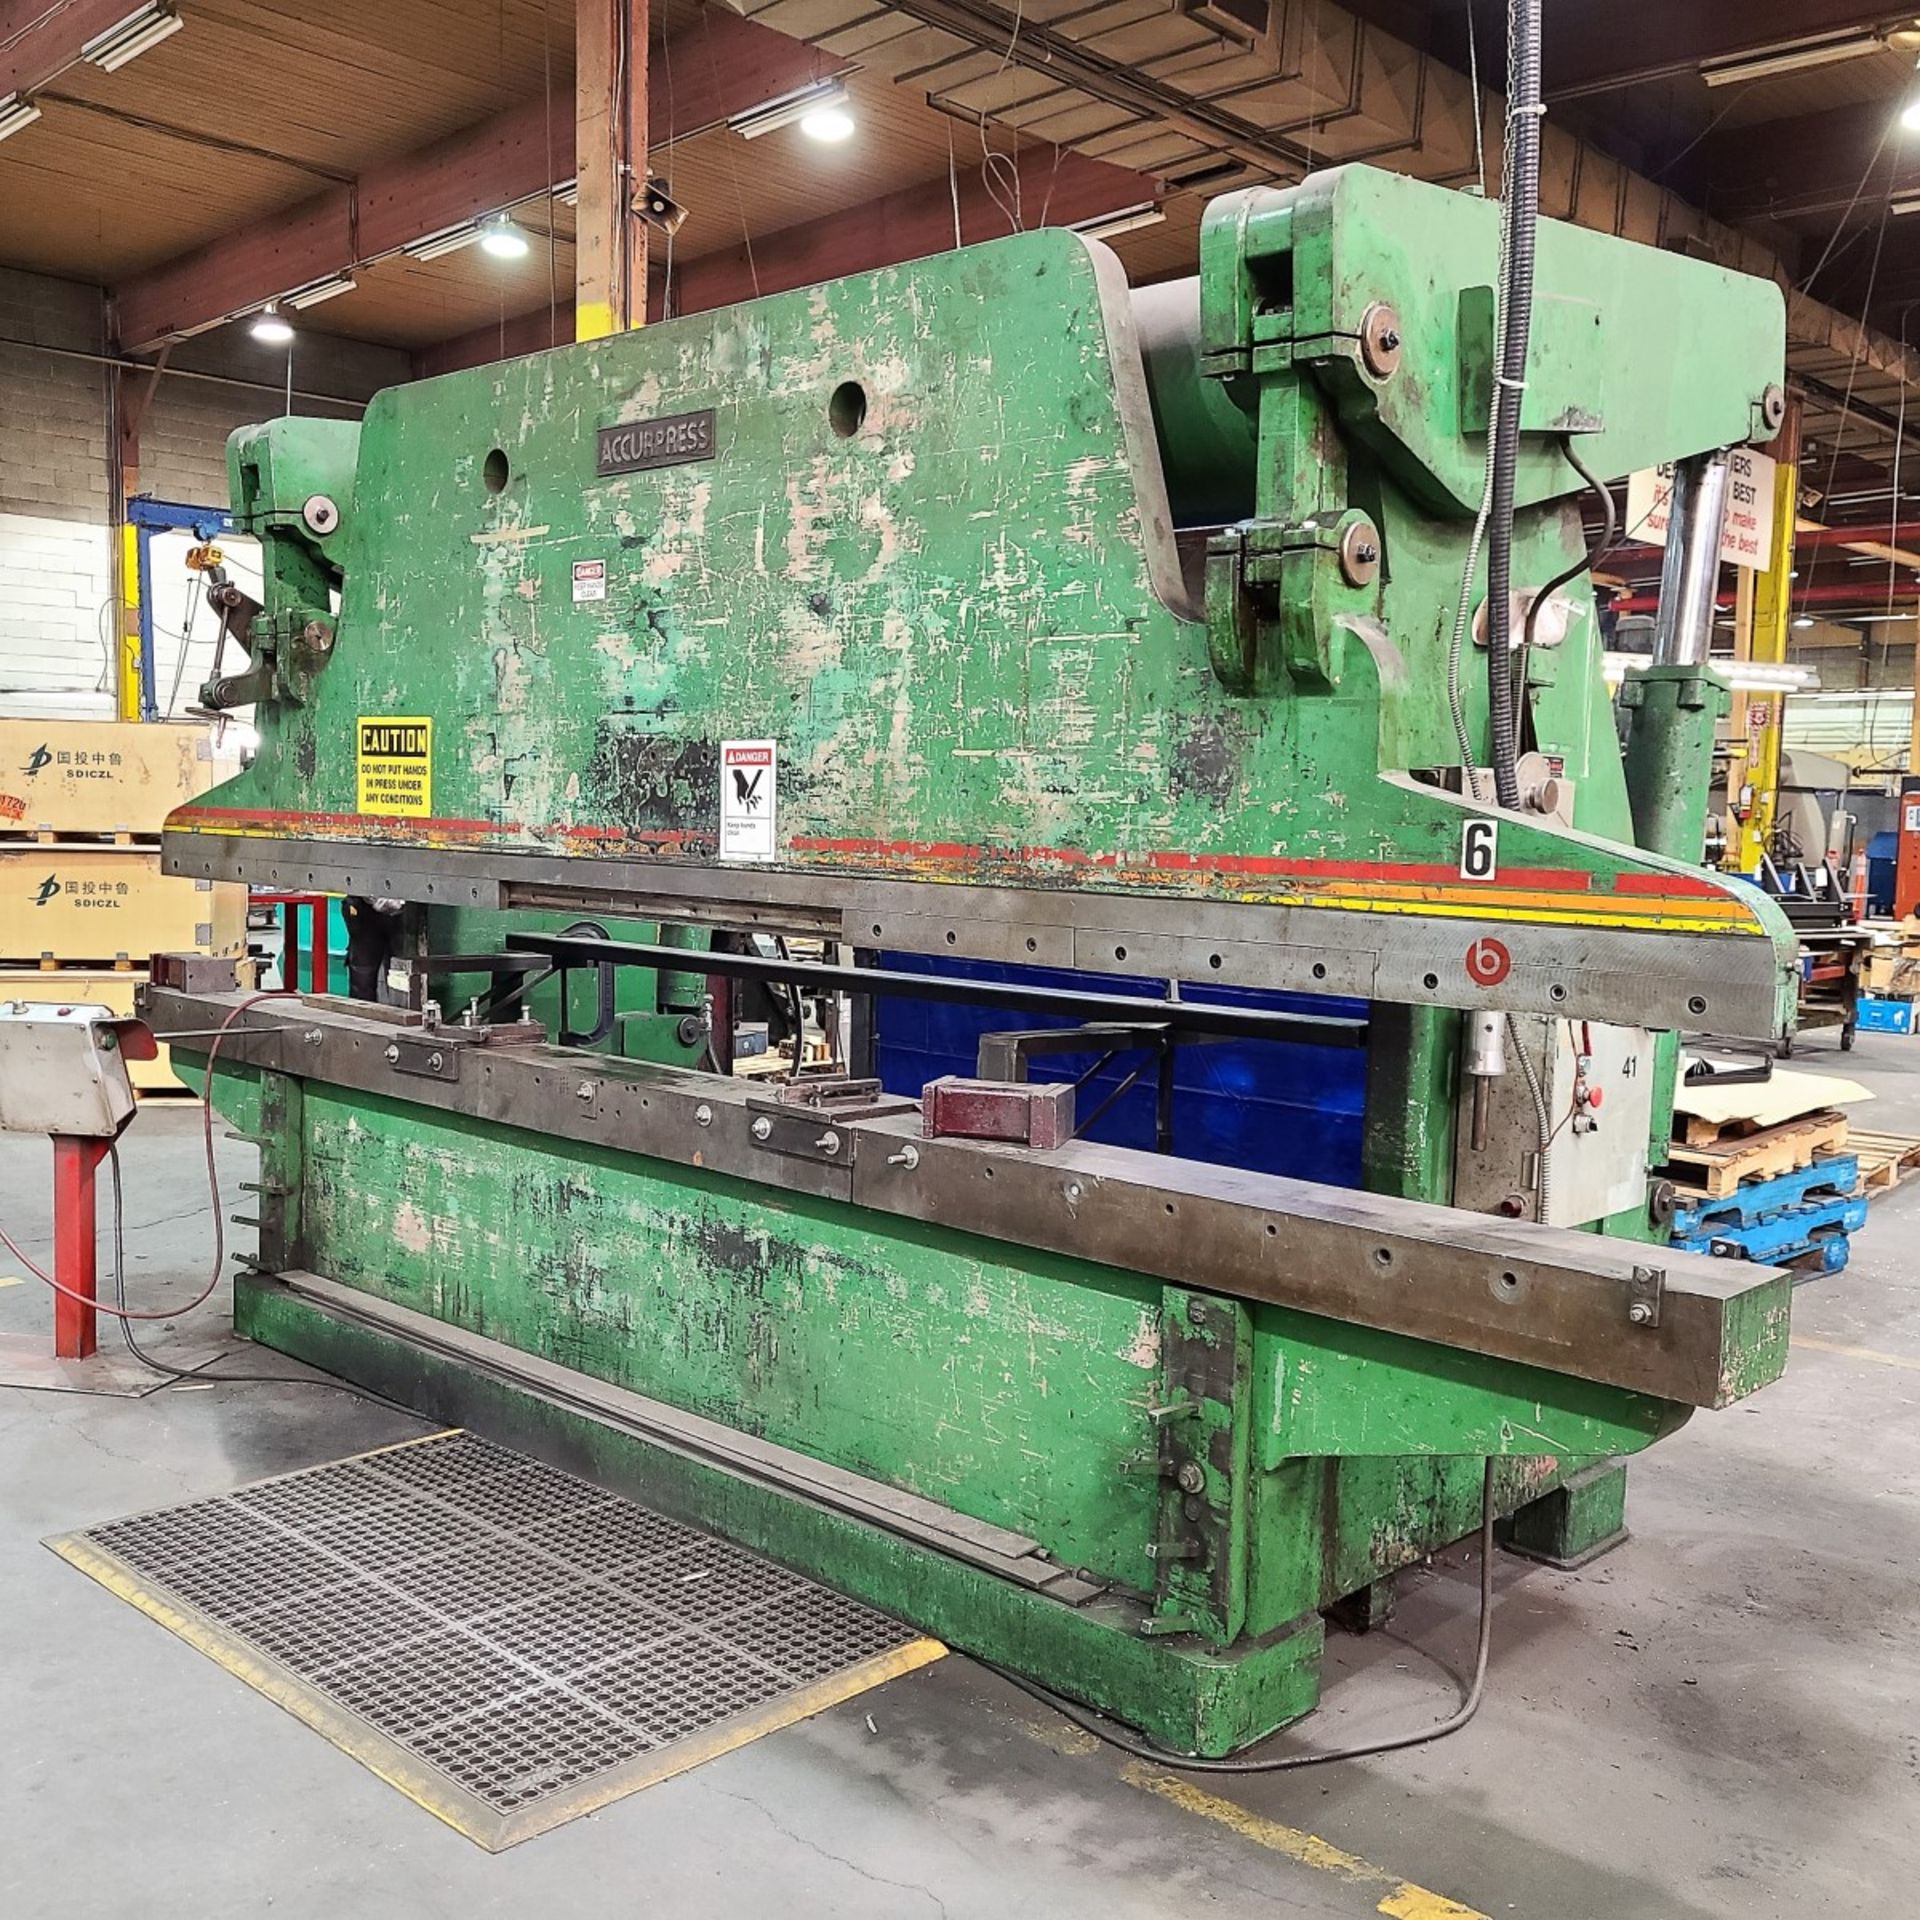 PRESS BRAKE – ACCURPRESS 250T X 16’ (2’ HORNS) MOD. 725012, 240V/3PH, NEW TOP FRONT BEARINGS ON - Image 2 of 12